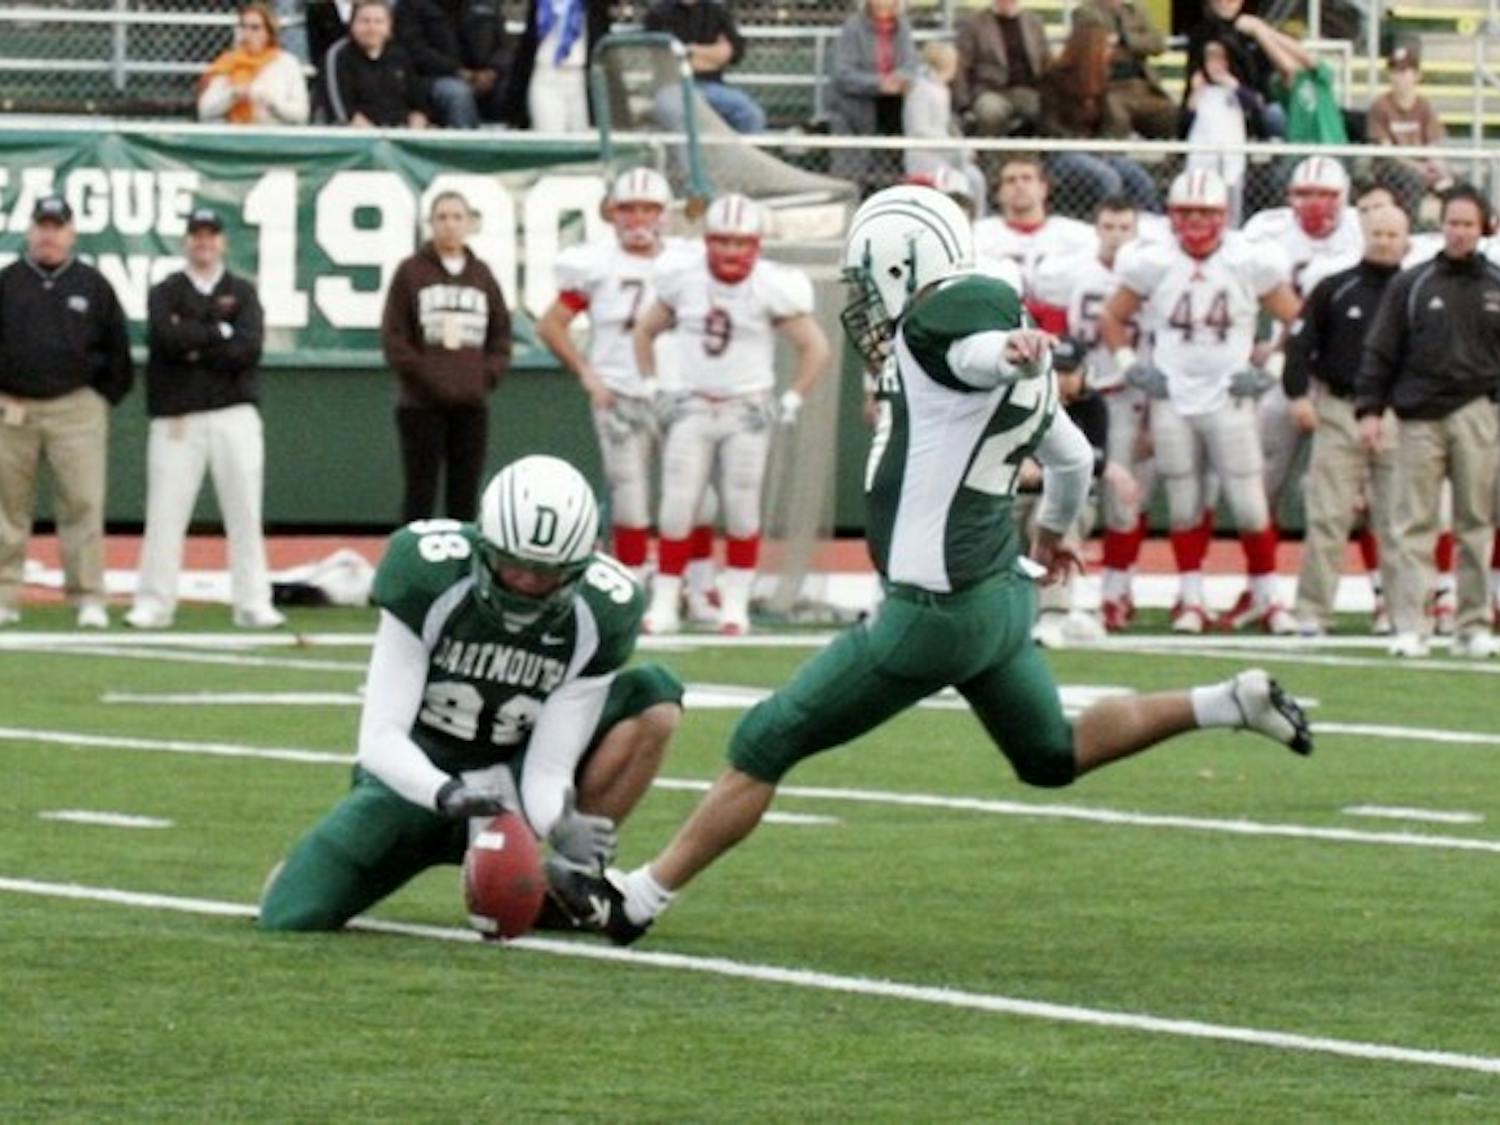 Kicker Andrew Kempler '08 and the Big Green hope to end a disappointing season on a winning note with a win over Ivy League power Princeton.